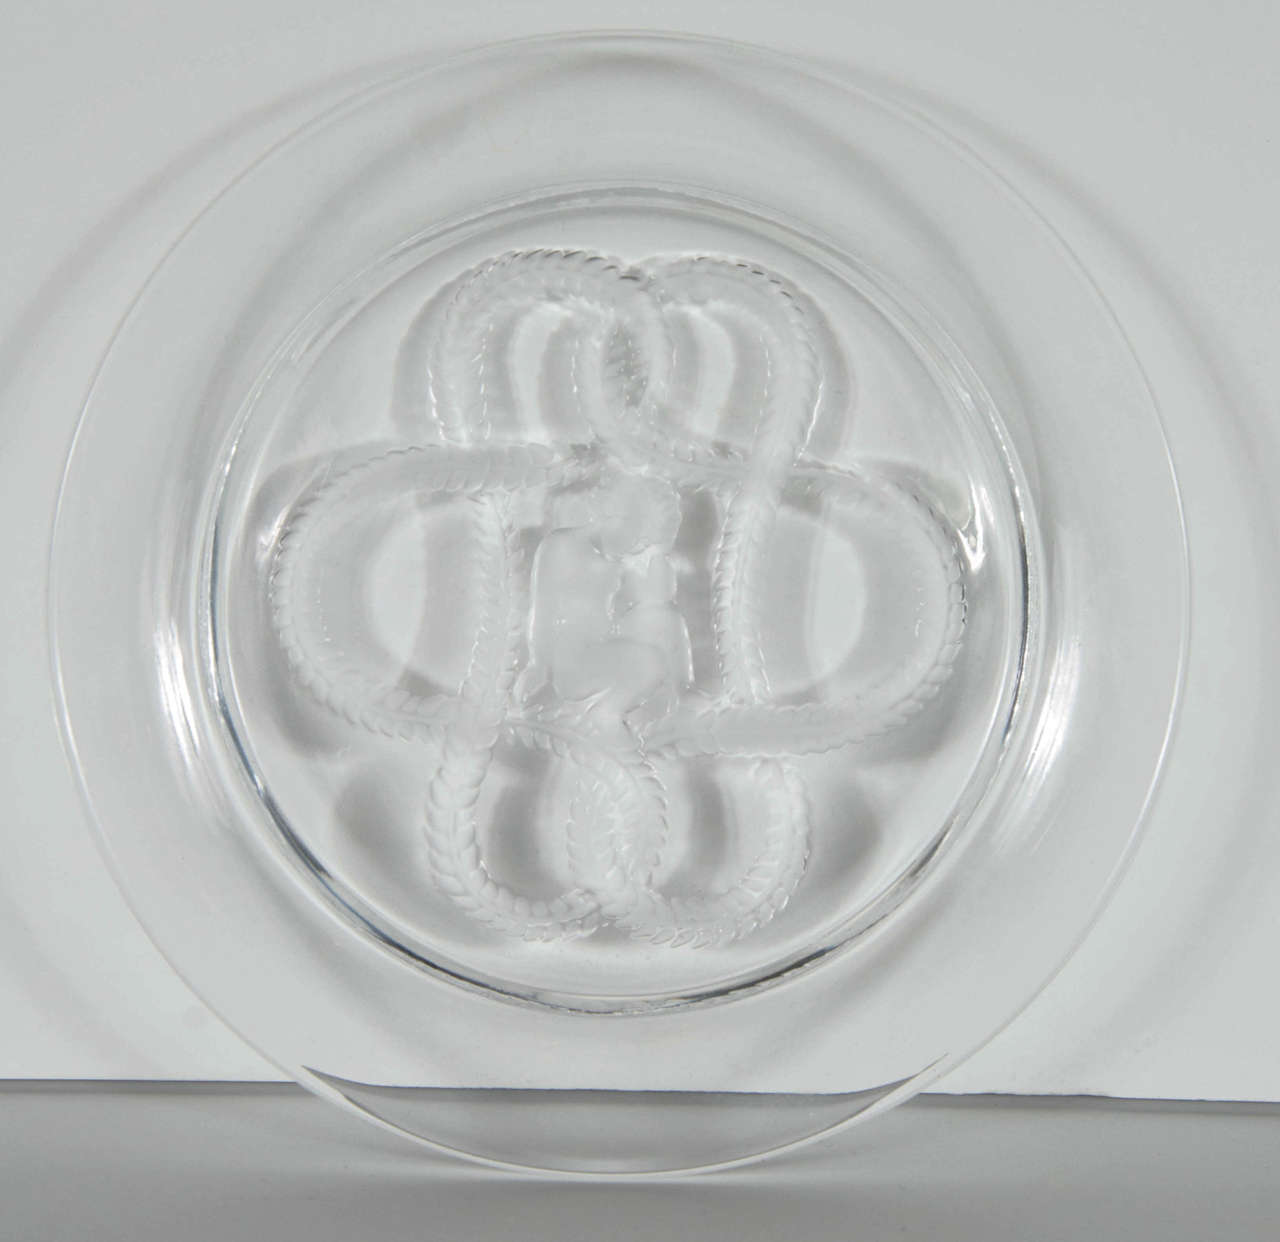 This elegant plate features a stylized interlocking laurel design and a seated cherub wearing an ivy crown in reverse etched frosted glass. This piece exhibits the meticulous detailing and quality craftsmanship for which Lalique is renowned. It